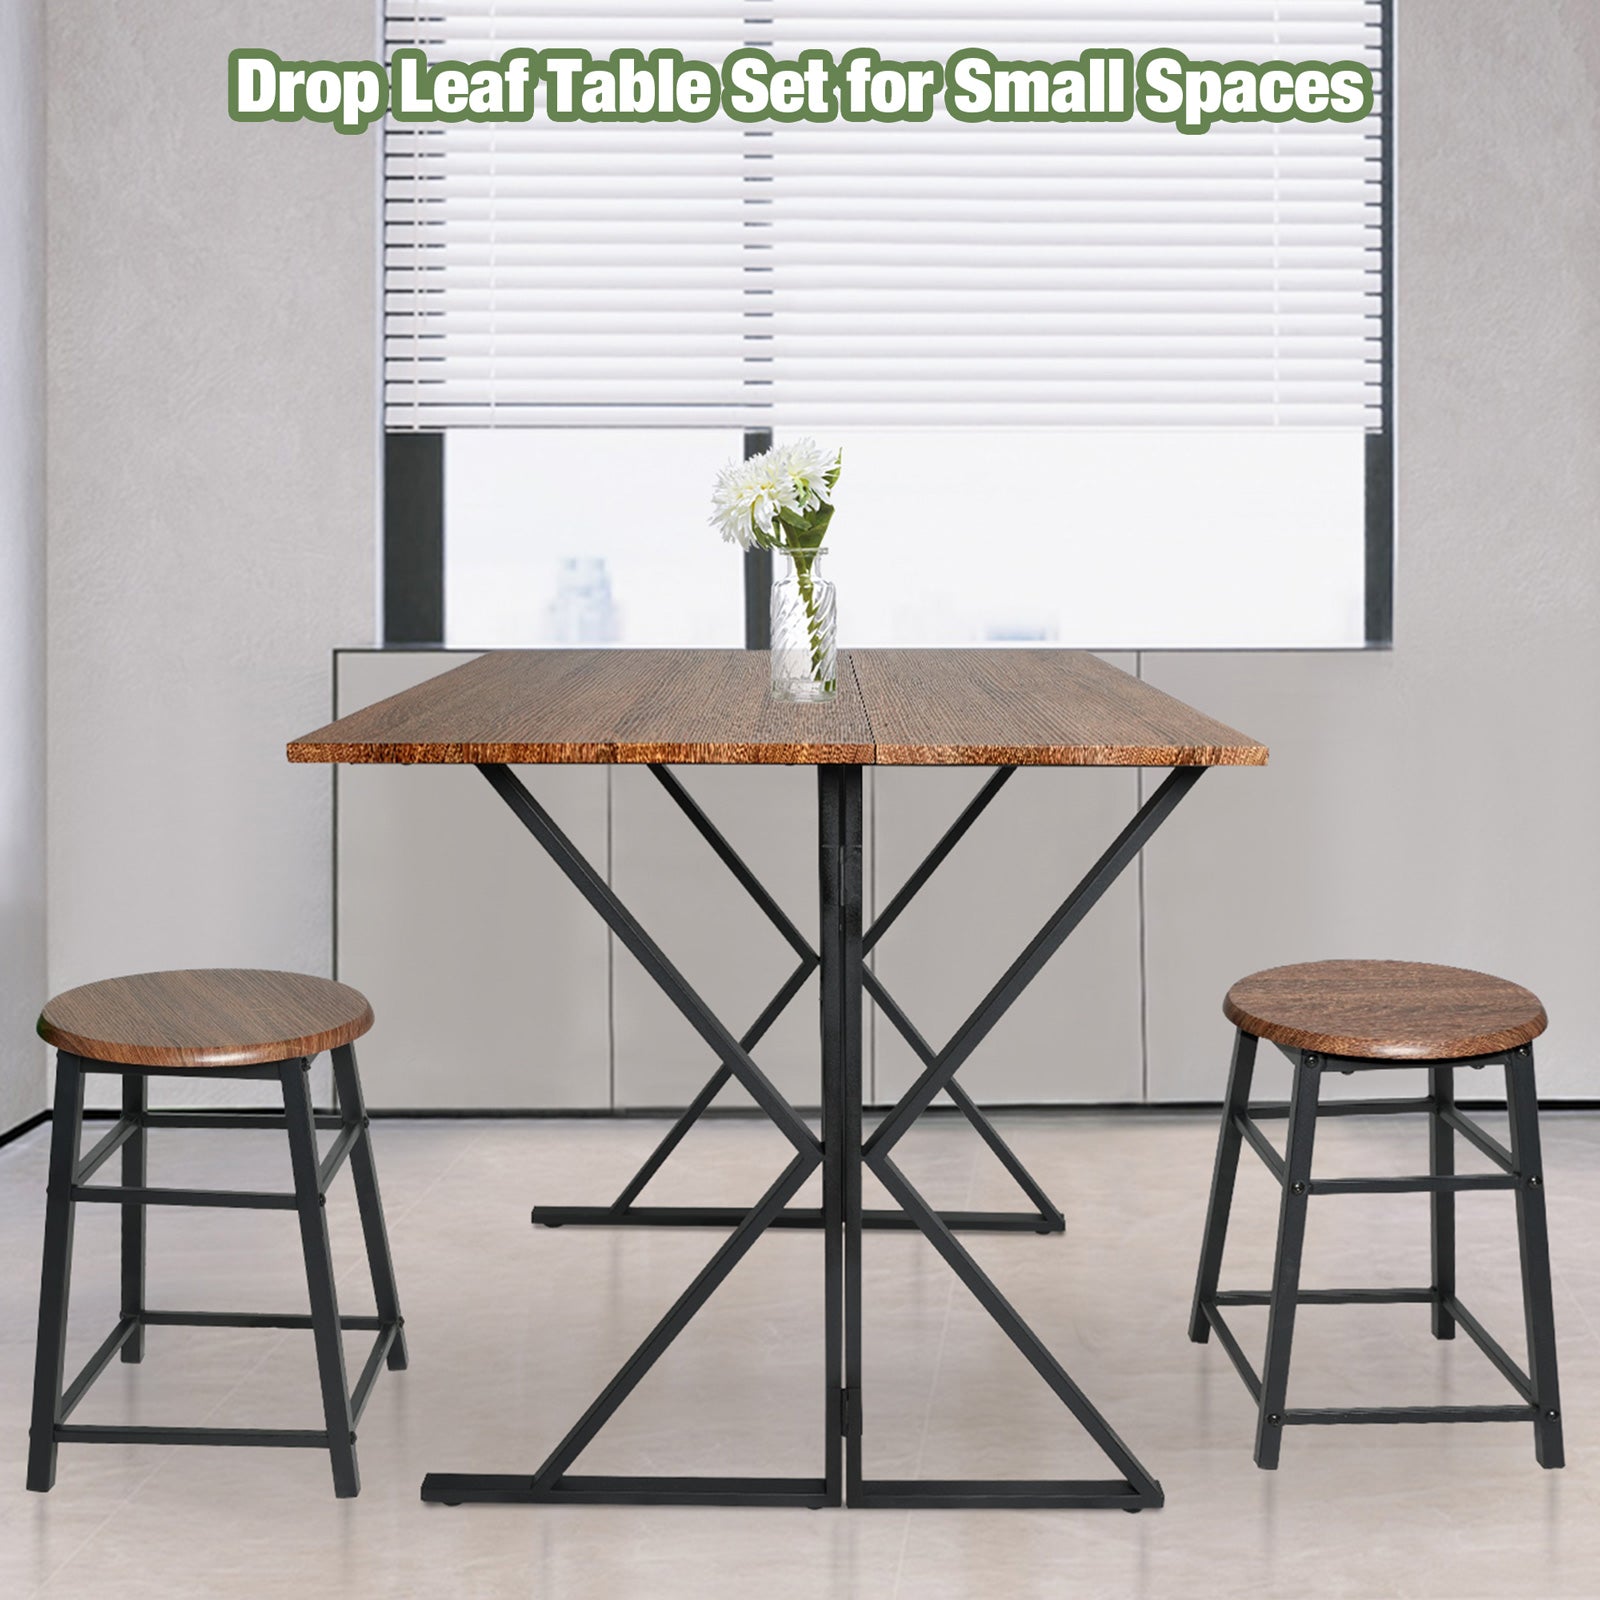 Mid Century Drop Leaf Table Set, 35.4" Drop Leaf Table for Small Space with 2 Stools